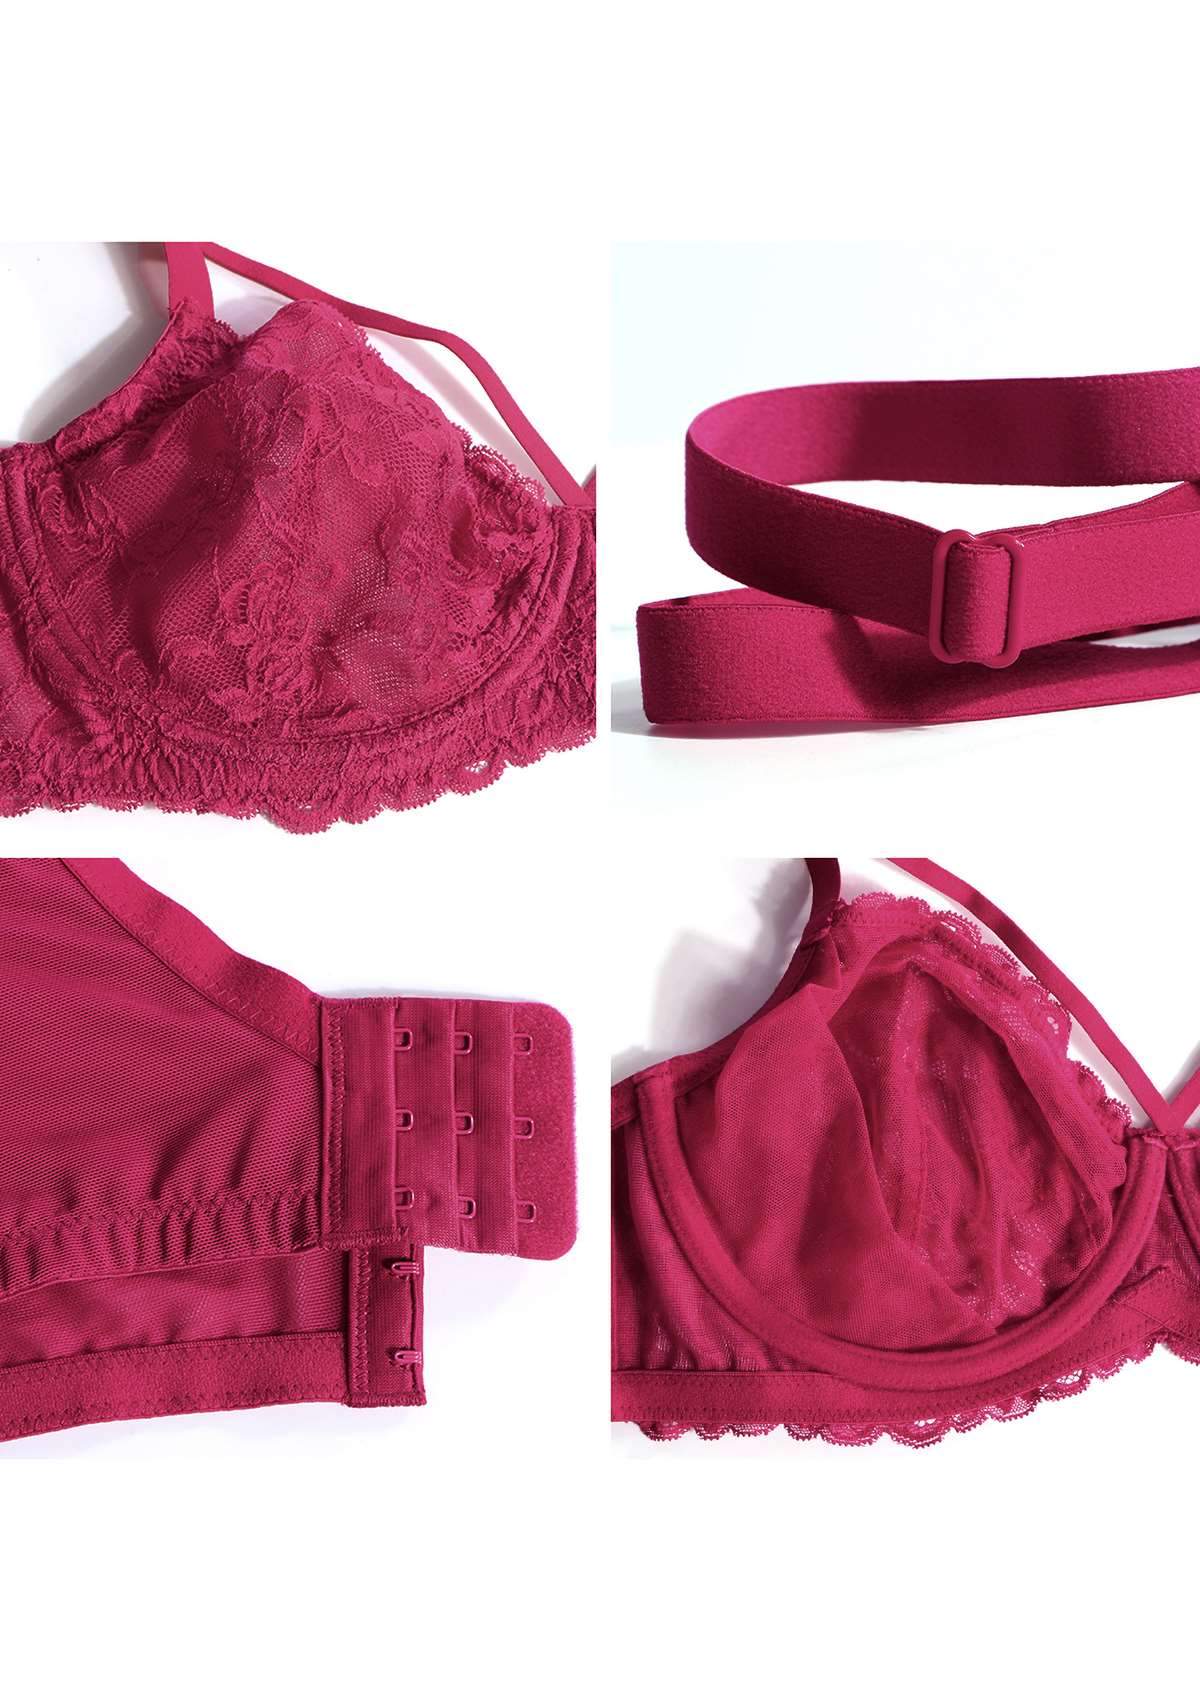 HSIA Pretty In Petals Sexy Lace Bra: Full Coverage Back Smoothing Bra - Red / 42 / D